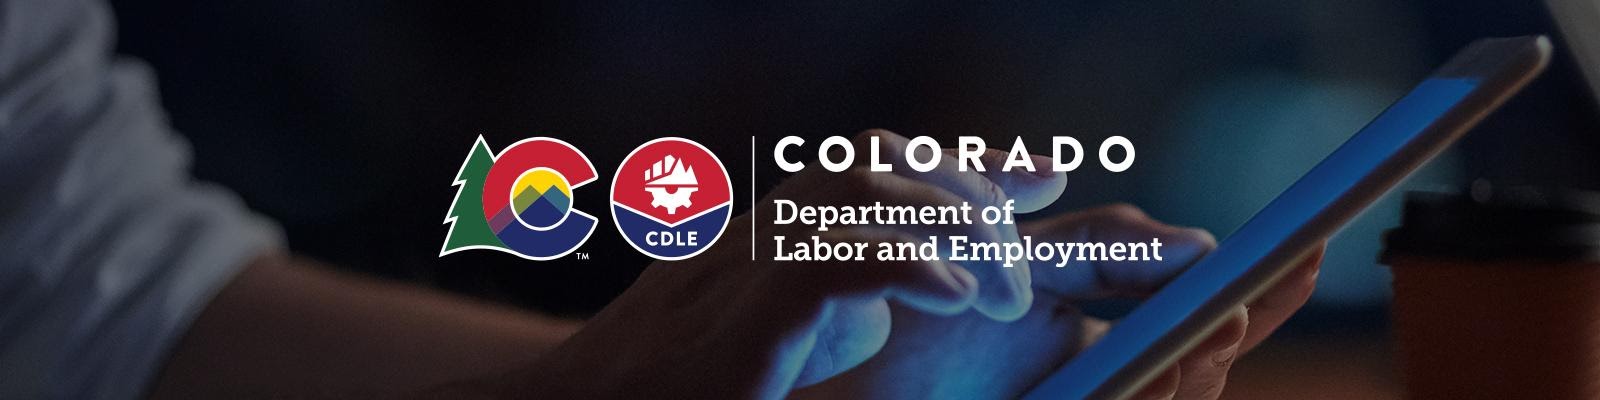 Colorado Department of Labor and Employment logo and name over a dark background.